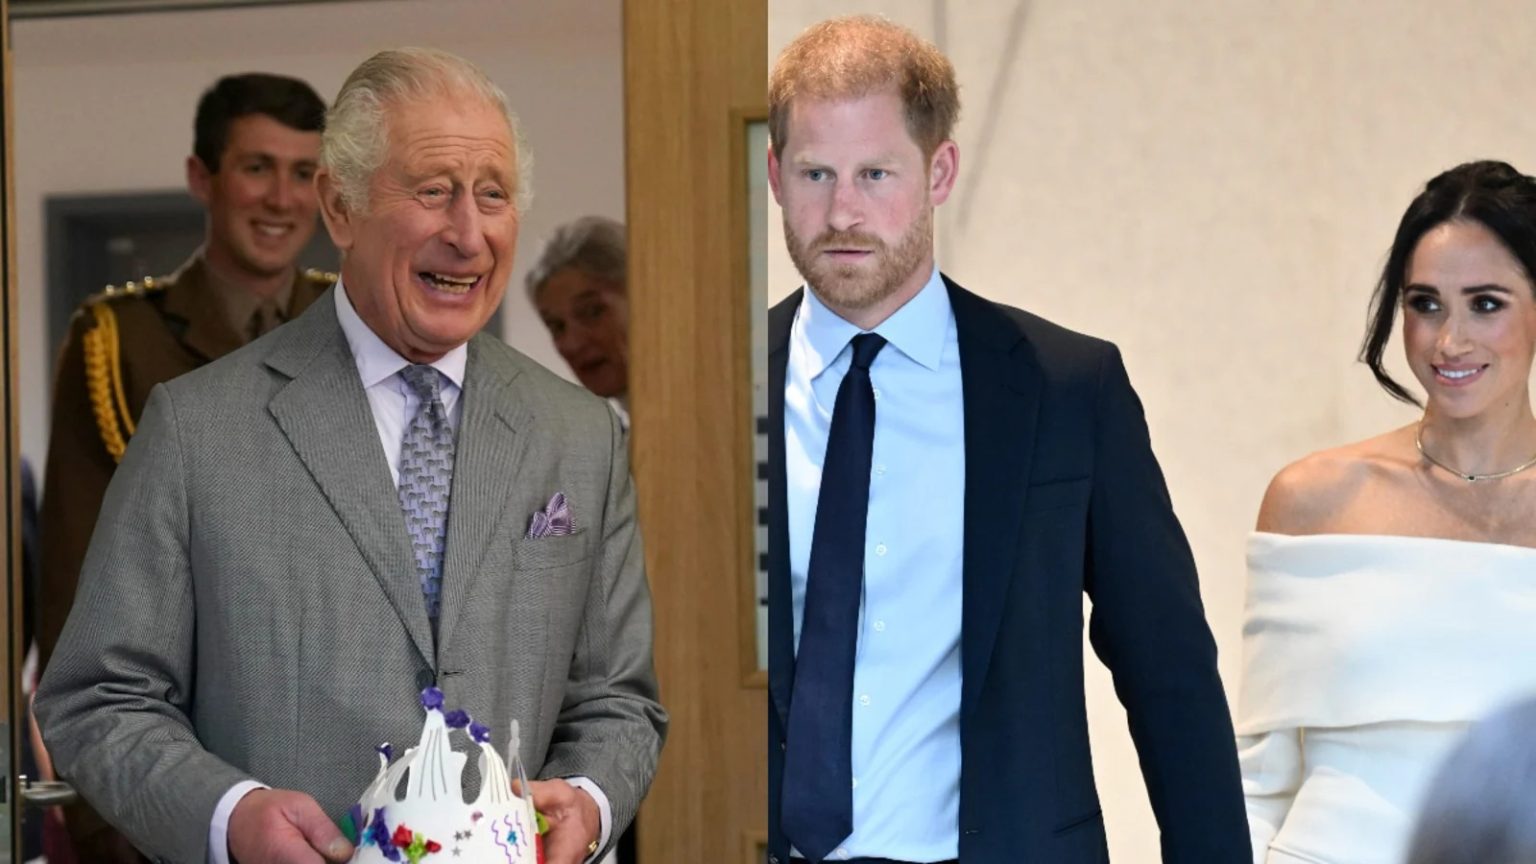 King Charles III visit, Prince Harry reunion, royal family news, Archie and Lilibet, King Charles US trip, royal family reconciliation, King Charles and Prince Harry, royal visit plans, Prince Harry and Meghan Markle, King Charles family visit